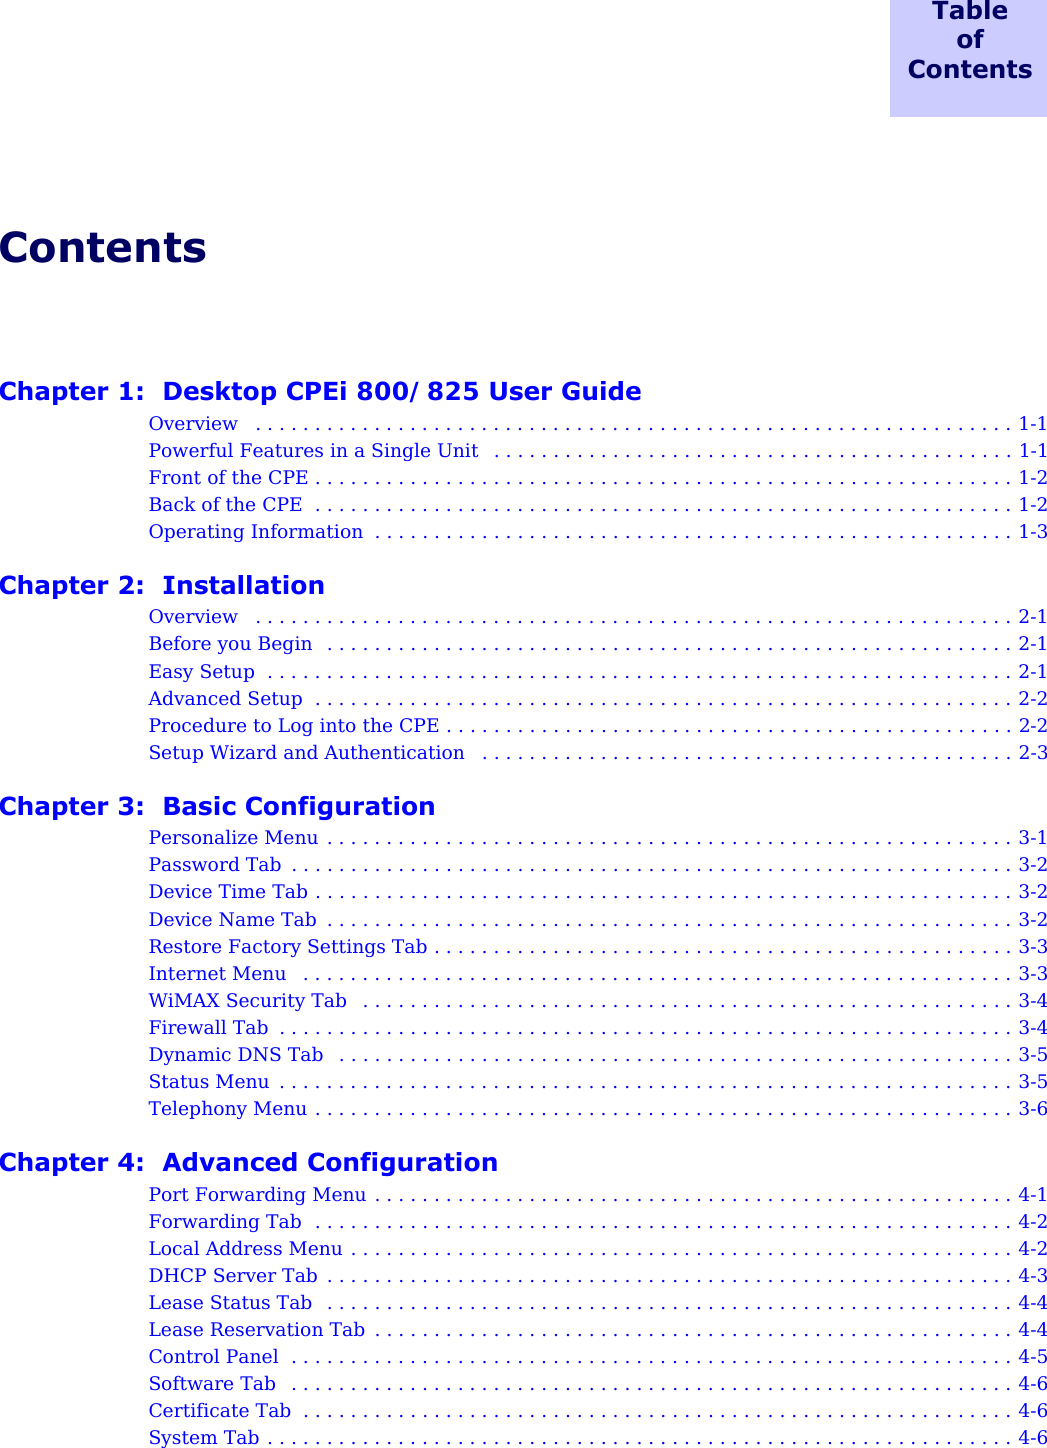 TableofContents ContentsChapter 1:  Desktop CPEi 800/825 User GuideOverview   . . . . . . . . . . . . . . . . . . . . . . . . . . . . . . . . . . . . . . . . . . . . . . . . . . . . . . . . . . . . . . . . 1-1Powerful Features in a Single Unit   . . . . . . . . . . . . . . . . . . . . . . . . . . . . . . . . . . . . . . . . . . . . 1-1Front of the CPE . . . . . . . . . . . . . . . . . . . . . . . . . . . . . . . . . . . . . . . . . . . . . . . . . . . . . . . . . . . 1-2Back of the CPE  . . . . . . . . . . . . . . . . . . . . . . . . . . . . . . . . . . . . . . . . . . . . . . . . . . . . . . . . . . . 1-2Operating Information  . . . . . . . . . . . . . . . . . . . . . . . . . . . . . . . . . . . . . . . . . . . . . . . . . . . . . . 1-3Chapter 2:  InstallationOverview   . . . . . . . . . . . . . . . . . . . . . . . . . . . . . . . . . . . . . . . . . . . . . . . . . . . . . . . . . . . . . . . . 2-1Before you Begin   . . . . . . . . . . . . . . . . . . . . . . . . . . . . . . . . . . . . . . . . . . . . . . . . . . . . . . . . . . 2-1Easy Setup  . . . . . . . . . . . . . . . . . . . . . . . . . . . . . . . . . . . . . . . . . . . . . . . . . . . . . . . . . . . . . . . 2-1Advanced Setup  . . . . . . . . . . . . . . . . . . . . . . . . . . . . . . . . . . . . . . . . . . . . . . . . . . . . . . . . . . . 2-2Procedure to Log into the CPE . . . . . . . . . . . . . . . . . . . . . . . . . . . . . . . . . . . . . . . . . . . . . . . . 2-2Setup Wizard and Authentication   . . . . . . . . . . . . . . . . . . . . . . . . . . . . . . . . . . . . . . . . . . . . . 2-3Chapter 3:  Basic ConfigurationPersonalize Menu  . . . . . . . . . . . . . . . . . . . . . . . . . . . . . . . . . . . . . . . . . . . . . . . . . . . . . . . . . . 3-1Password Tab  . . . . . . . . . . . . . . . . . . . . . . . . . . . . . . . . . . . . . . . . . . . . . . . . . . . . . . . . . . . . . 3-2Device Time Tab . . . . . . . . . . . . . . . . . . . . . . . . . . . . . . . . . . . . . . . . . . . . . . . . . . . . . . . . . . . 3-2Device Name Tab  . . . . . . . . . . . . . . . . . . . . . . . . . . . . . . . . . . . . . . . . . . . . . . . . . . . . . . . . . . 3-2Restore Factory Settings Tab . . . . . . . . . . . . . . . . . . . . . . . . . . . . . . . . . . . . . . . . . . . . . . . . . 3-3Internet Menu   . . . . . . . . . . . . . . . . . . . . . . . . . . . . . . . . . . . . . . . . . . . . . . . . . . . . . . . . . . . . 3-3WiMAX Security Tab   . . . . . . . . . . . . . . . . . . . . . . . . . . . . . . . . . . . . . . . . . . . . . . . . . . . . . . . 3-4Firewall Tab  . . . . . . . . . . . . . . . . . . . . . . . . . . . . . . . . . . . . . . . . . . . . . . . . . . . . . . . . . . . . . . 3-4Dynamic DNS Tab   . . . . . . . . . . . . . . . . . . . . . . . . . . . . . . . . . . . . . . . . . . . . . . . . . . . . . . . . . 3-5Status Menu  . . . . . . . . . . . . . . . . . . . . . . . . . . . . . . . . . . . . . . . . . . . . . . . . . . . . . . . . . . . . . . 3-5Telephony Menu . . . . . . . . . . . . . . . . . . . . . . . . . . . . . . . . . . . . . . . . . . . . . . . . . . . . . . . . . . . 3-6Chapter 4:  Advanced ConfigurationPort Forwarding Menu . . . . . . . . . . . . . . . . . . . . . . . . . . . . . . . . . . . . . . . . . . . . . . . . . . . . . . 4-1Forwarding Tab  . . . . . . . . . . . . . . . . . . . . . . . . . . . . . . . . . . . . . . . . . . . . . . . . . . . . . . . . . . . 4-2Local Address Menu . . . . . . . . . . . . . . . . . . . . . . . . . . . . . . . . . . . . . . . . . . . . . . . . . . . . . . . . 4-2DHCP Server Tab  . . . . . . . . . . . . . . . . . . . . . . . . . . . . . . . . . . . . . . . . . . . . . . . . . . . . . . . . . . 4-3Lease Status Tab  . . . . . . . . . . . . . . . . . . . . . . . . . . . . . . . . . . . . . . . . . . . . . . . . . . . . . . . . . . 4-4Lease Reservation Tab  . . . . . . . . . . . . . . . . . . . . . . . . . . . . . . . . . . . . . . . . . . . . . . . . . . . . . . 4-4Control Panel  . . . . . . . . . . . . . . . . . . . . . . . . . . . . . . . . . . . . . . . . . . . . . . . . . . . . . . . . . . . . . 4-5Software Tab   . . . . . . . . . . . . . . . . . . . . . . . . . . . . . . . . . . . . . . . . . . . . . . . . . . . . . . . . . . . . . 4-6Certificate Tab  . . . . . . . . . . . . . . . . . . . . . . . . . . . . . . . . . . . . . . . . . . . . . . . . . . . . . . . . . . . . 4-6System Tab . . . . . . . . . . . . . . . . . . . . . . . . . . . . . . . . . . . . . . . . . . . . . . . . . . . . . . . . . . . . . . . 4-6